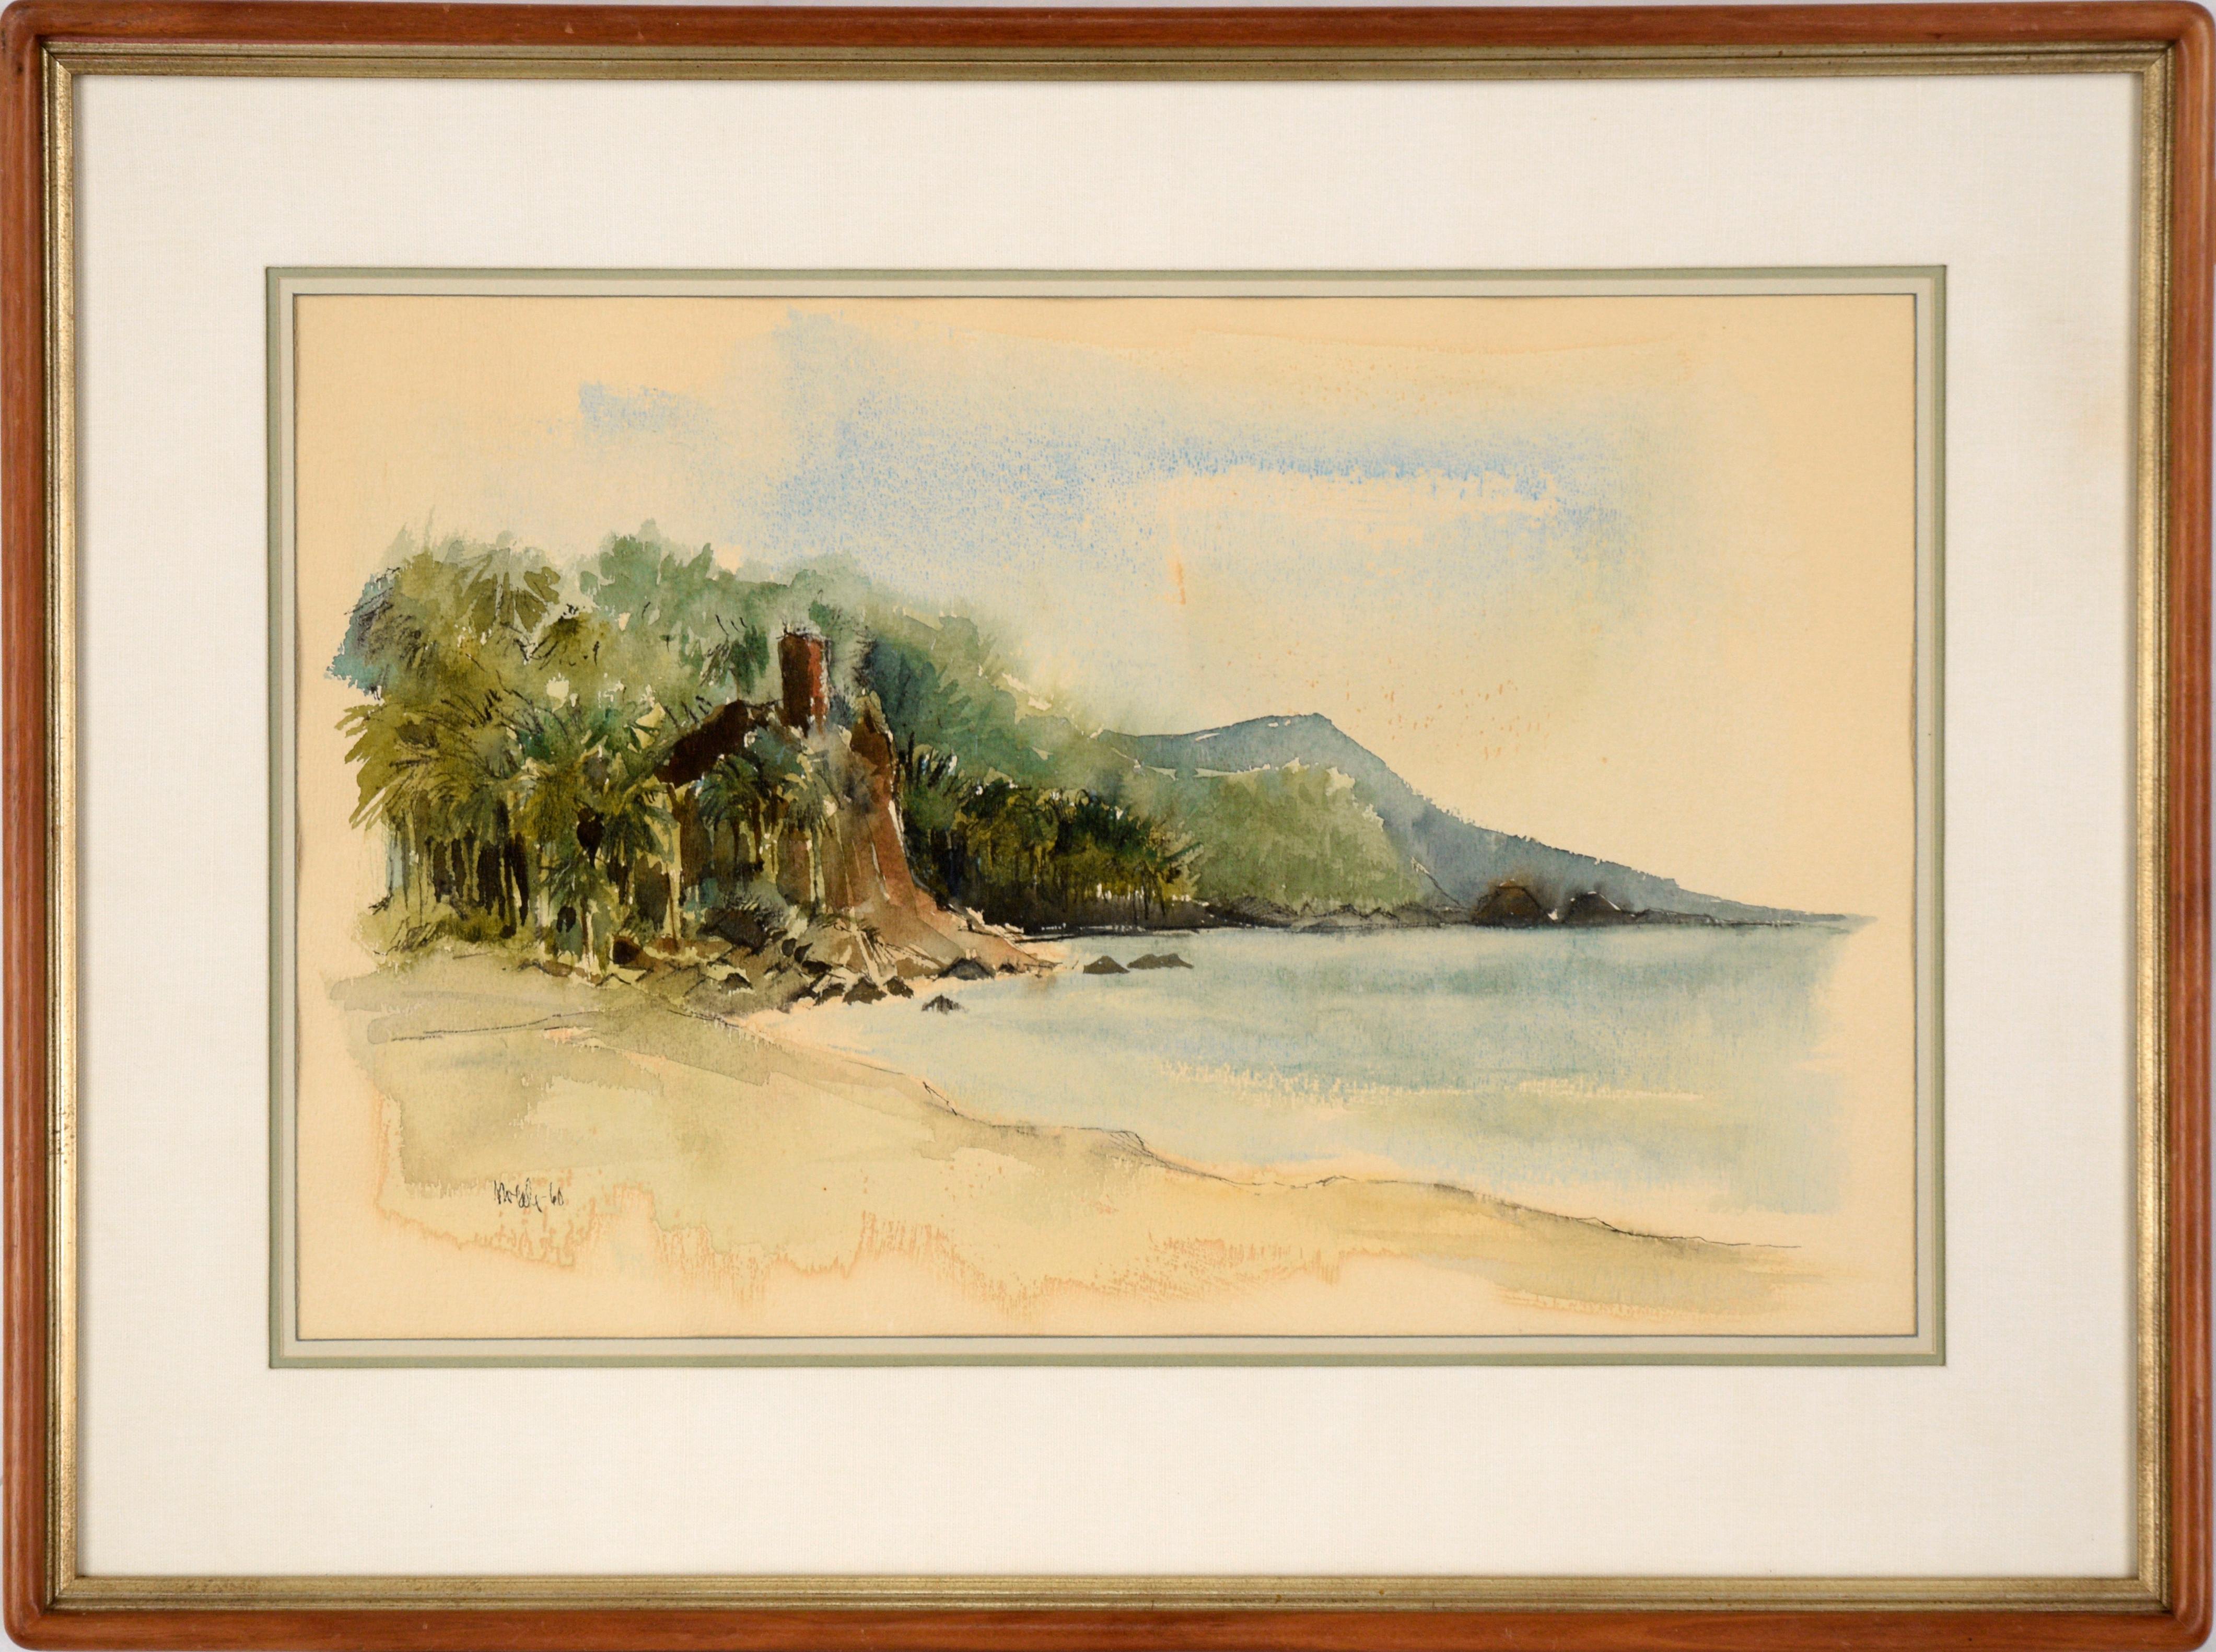 Unknown Landscape Art - Hawaiian Tropical Beach and Mountains - Watercolor on Paper 1960